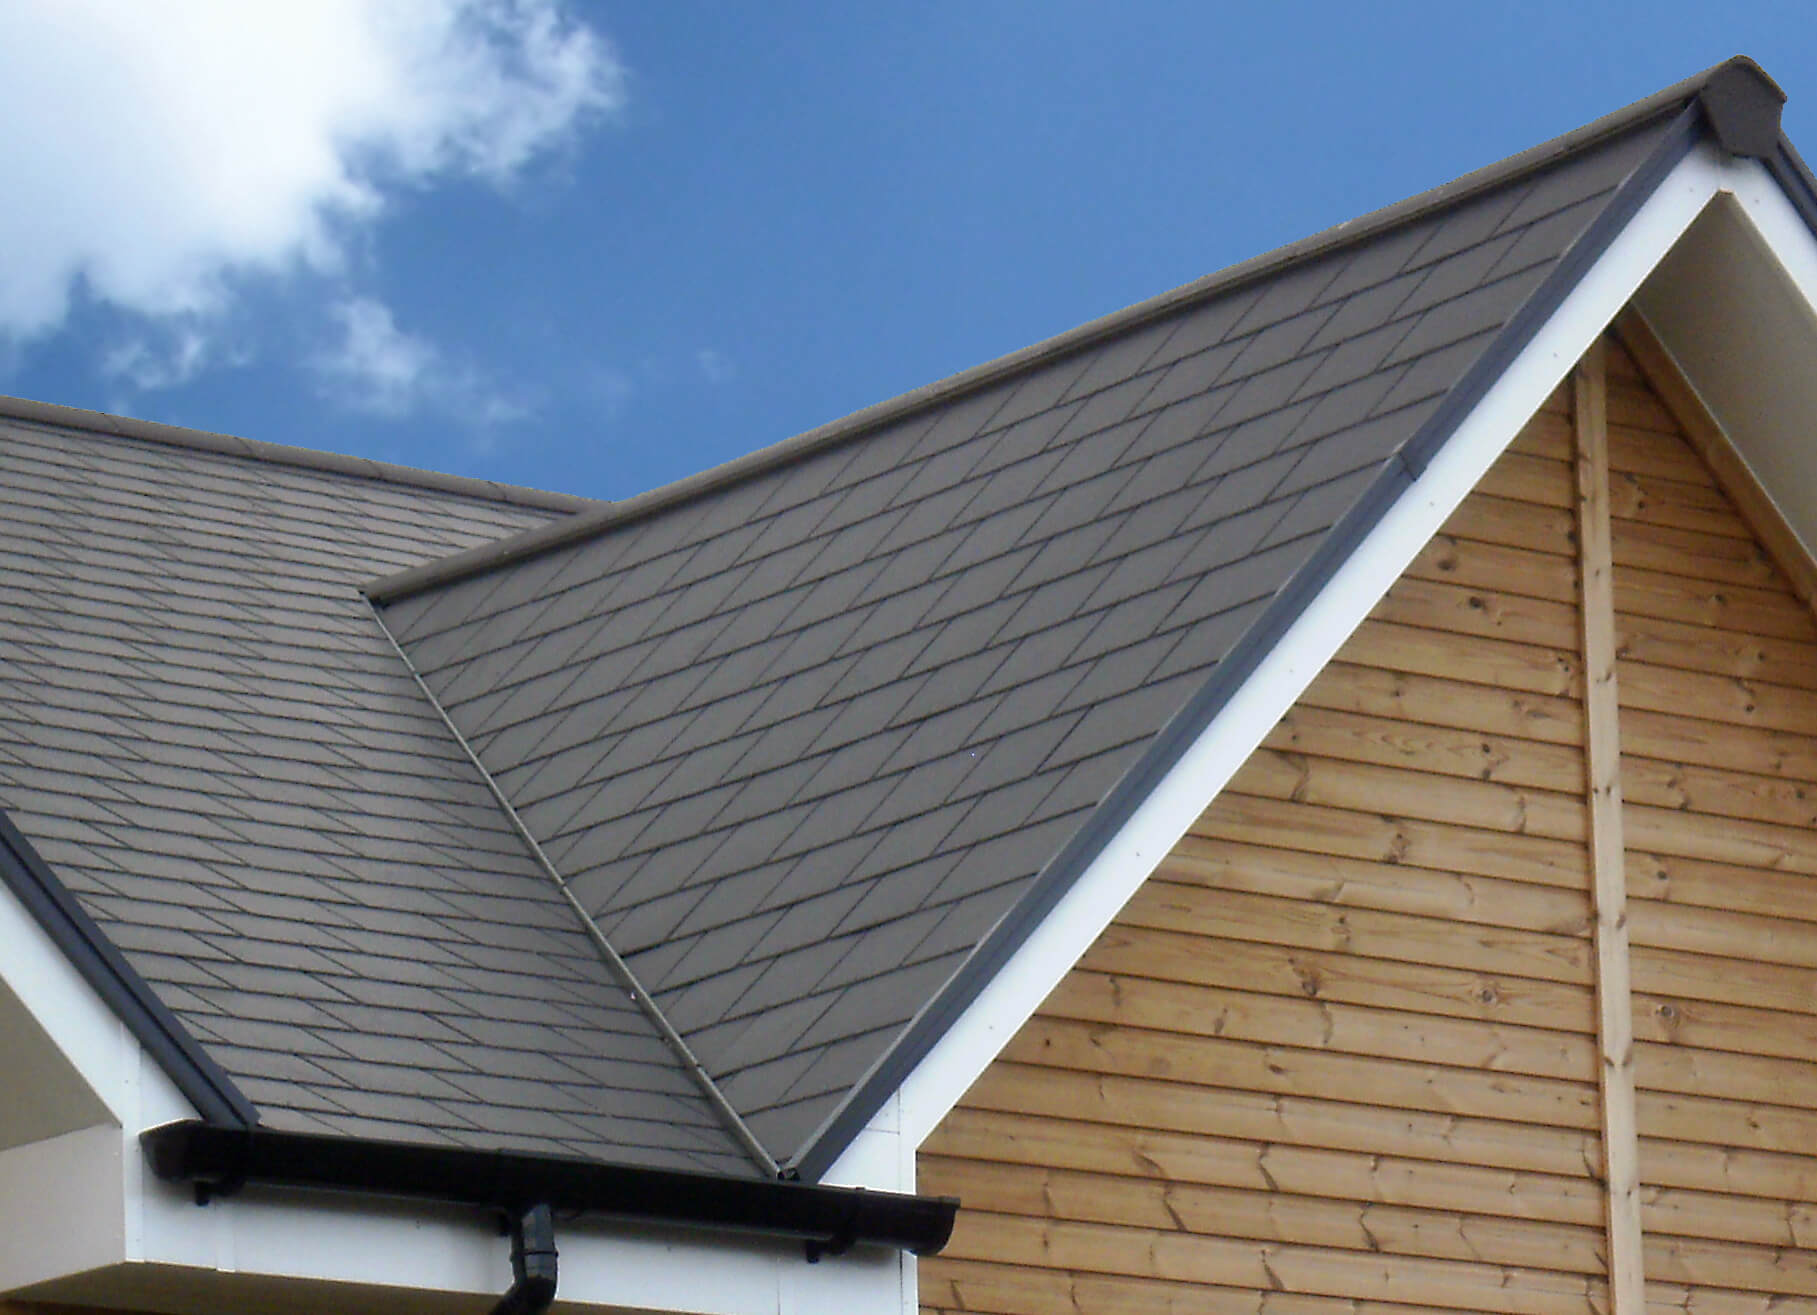 Consider Investing in a New Roofs to revamp home